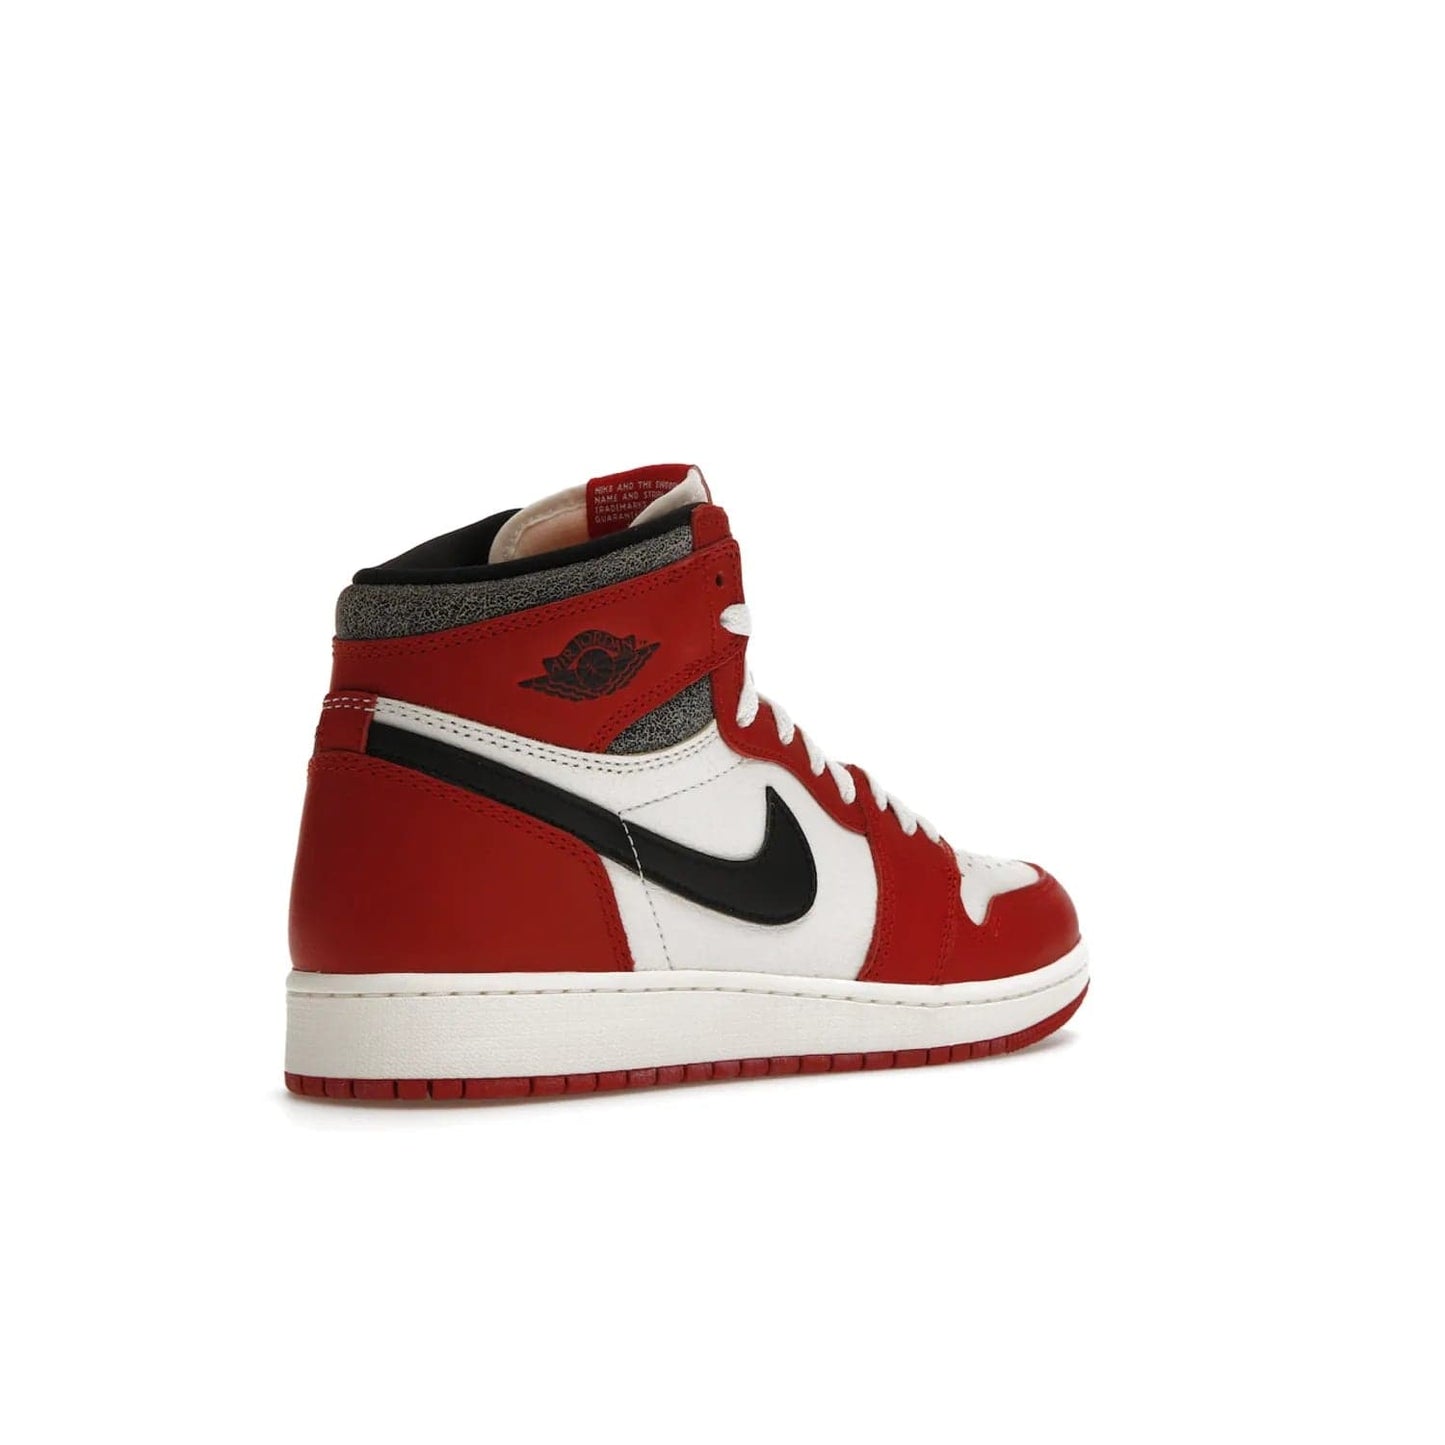 Jordan 1 Retro High OG Chicago Lost and Found (GS) - Image 33 - Only at www.BallersClubKickz.com - Grab the Air Jordan 1 Retro High OG Chicago Reimagined GS, presenting in classic 1985 silhouette. Varsity Red, Black, Muslin and Sail hues, featuring Nike Air branding, Wings on the collars and printed insoles. Don't miss out when it releases 19th Nov 2022.